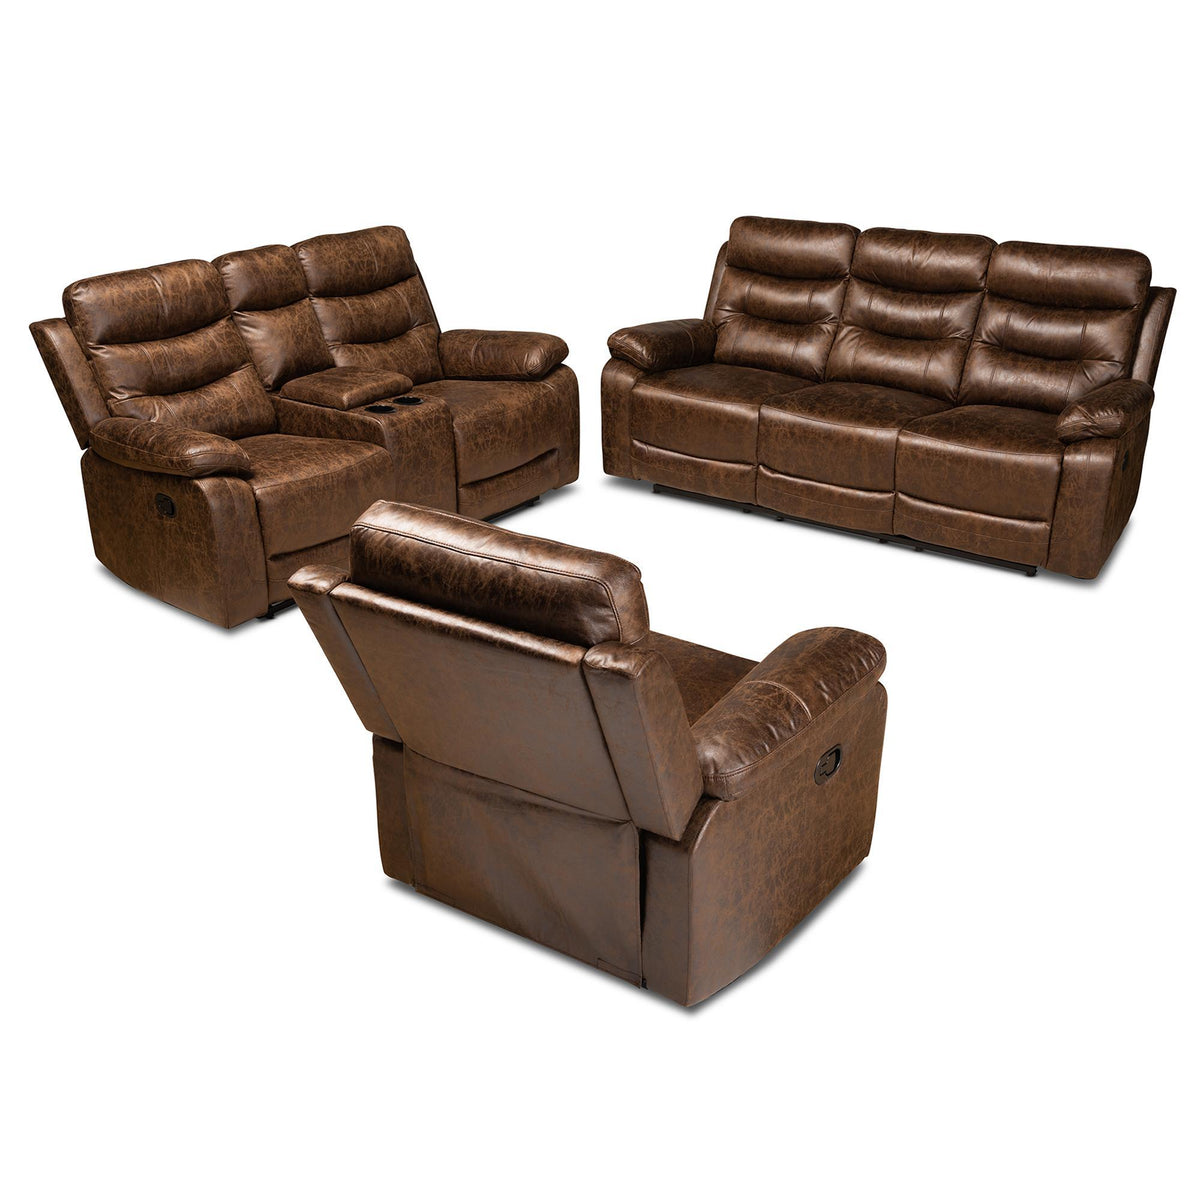 Baxton Studio Beasely Modern And Contemporary Distressed Brown Faux Leather Upholstered 3-Piece Living Room Set - RR5227-Dark Brown-3PC Living Room Set